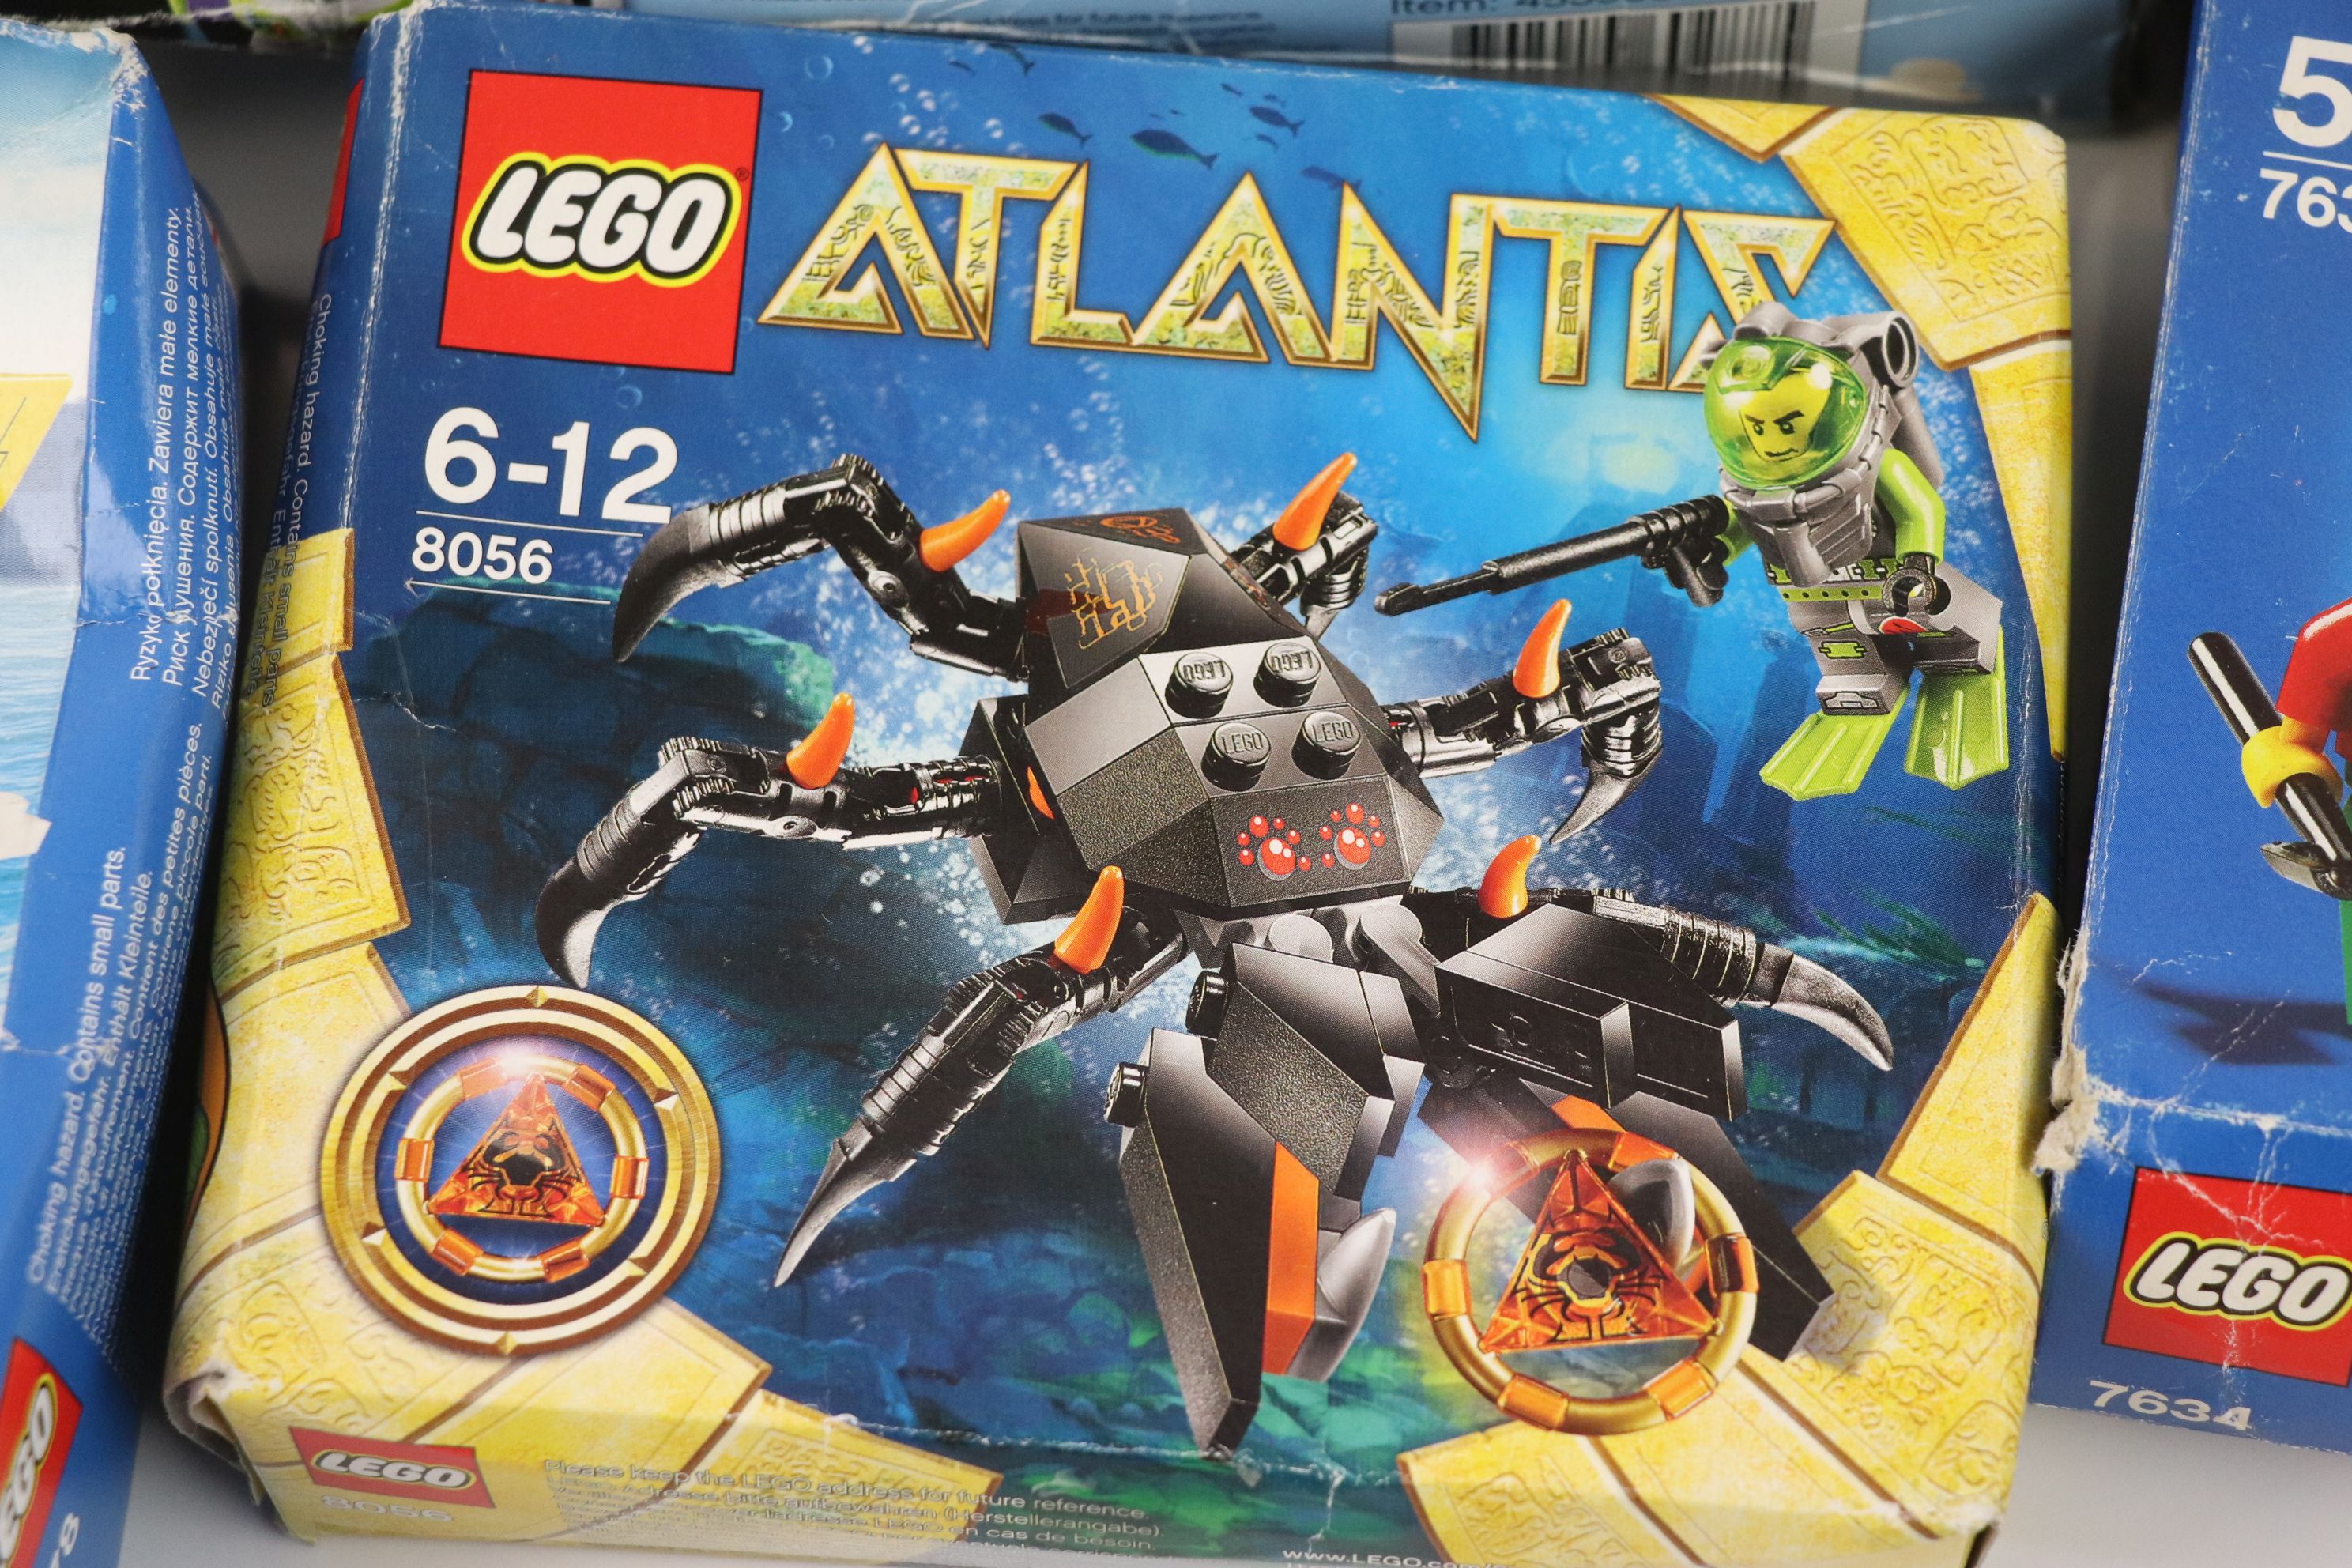 Seven boxed Lego sets to include Toy Story 7593, City x 4 (7248, 3365, 7634 & 3178), Atlantis 8056 - Image 6 of 8